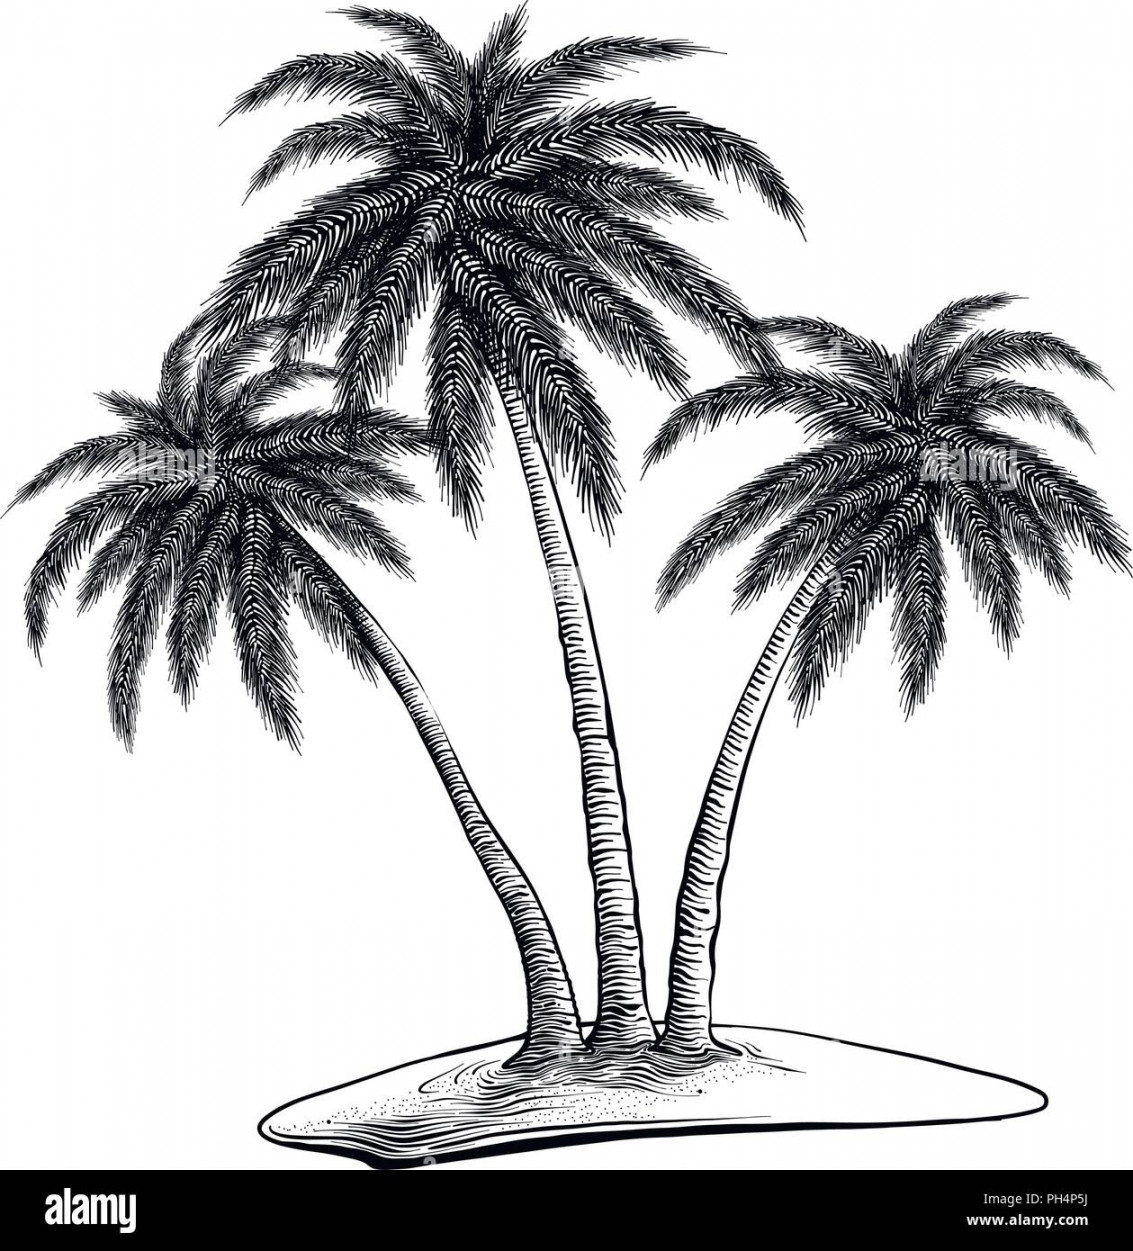 Hand drawn sketch of palm trees in black isolated on white